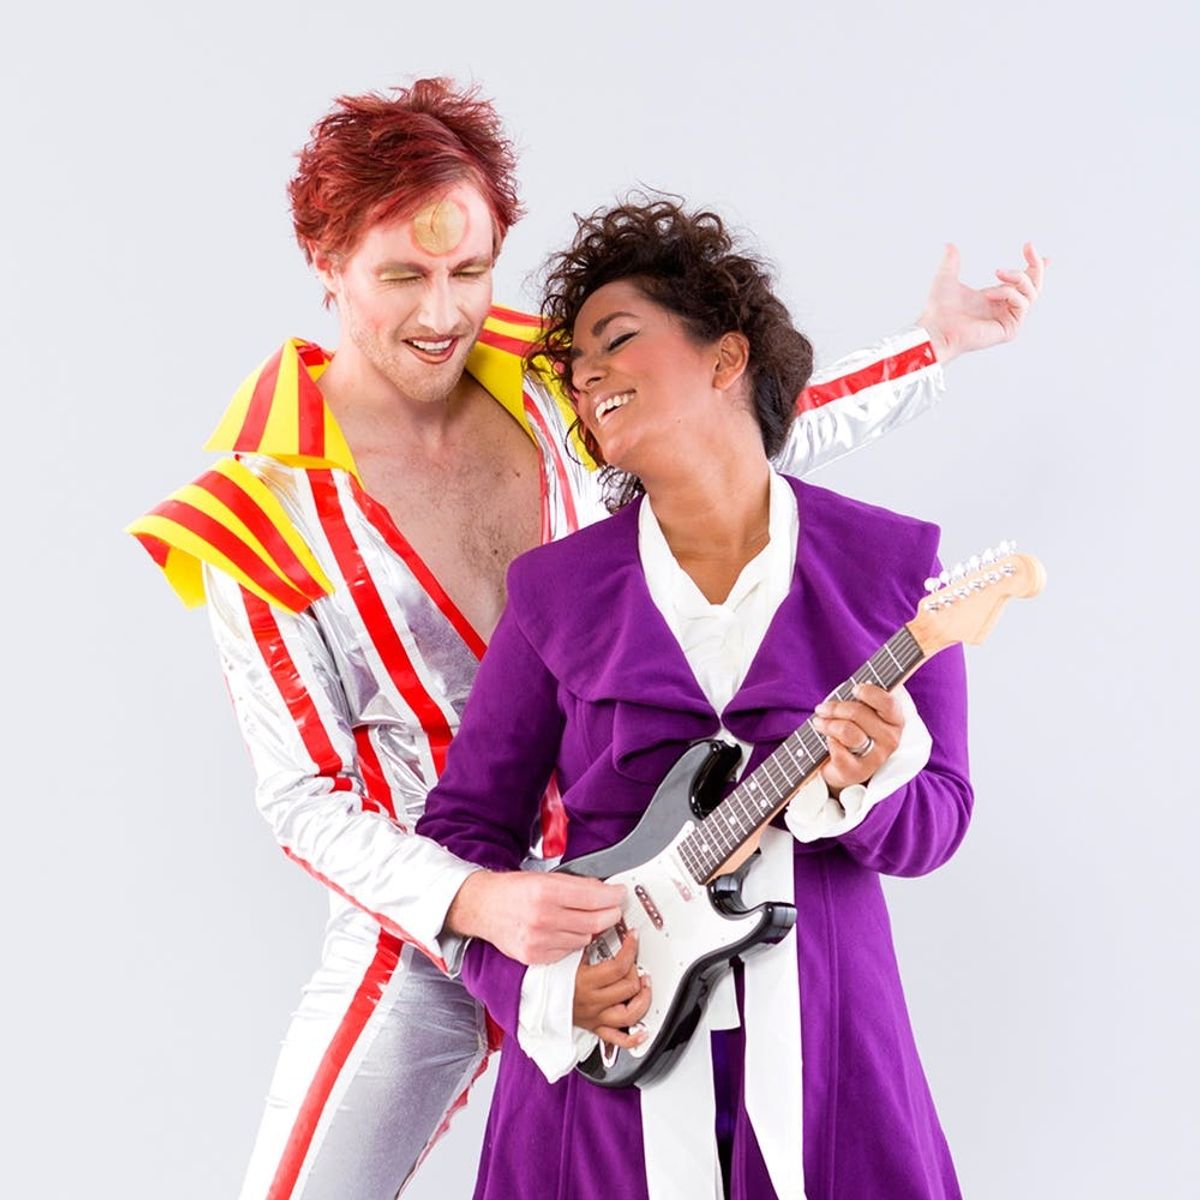 This DIY David Bowie and Prince Couples Costume Will Give You All the Feels